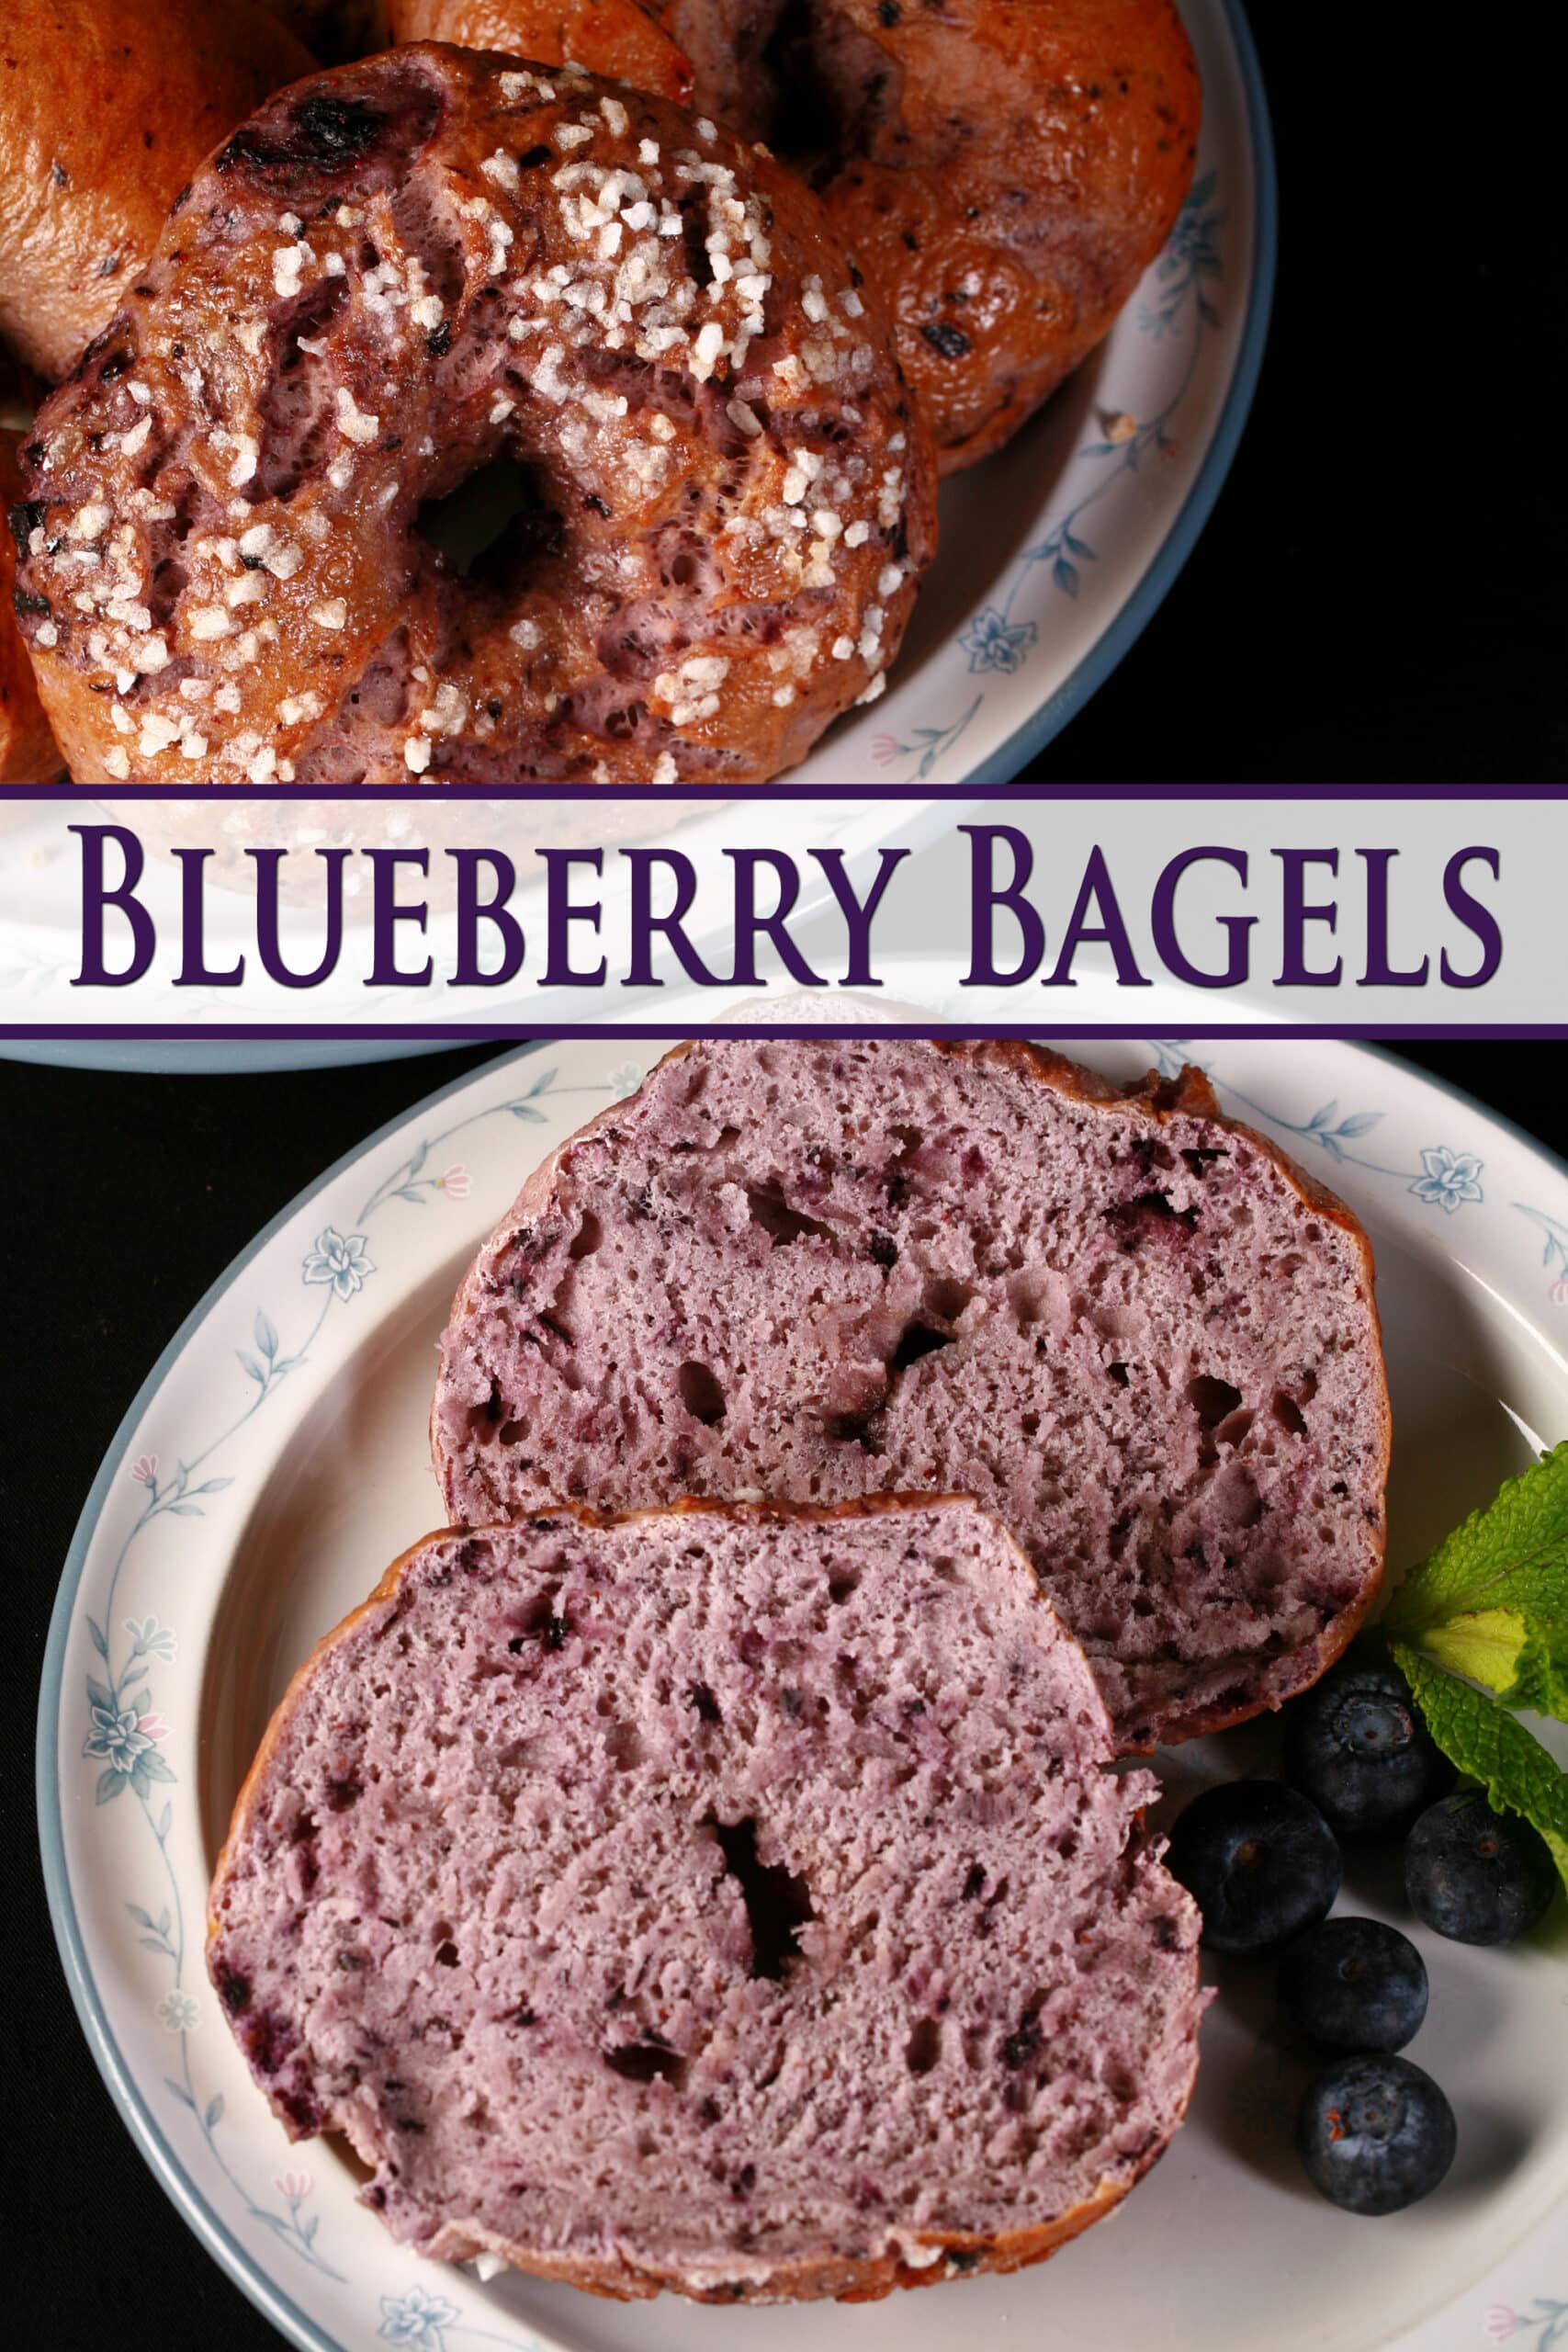 A split open blueberry bagel on a small plate in front of a plate of 6 more blueberry bagels.